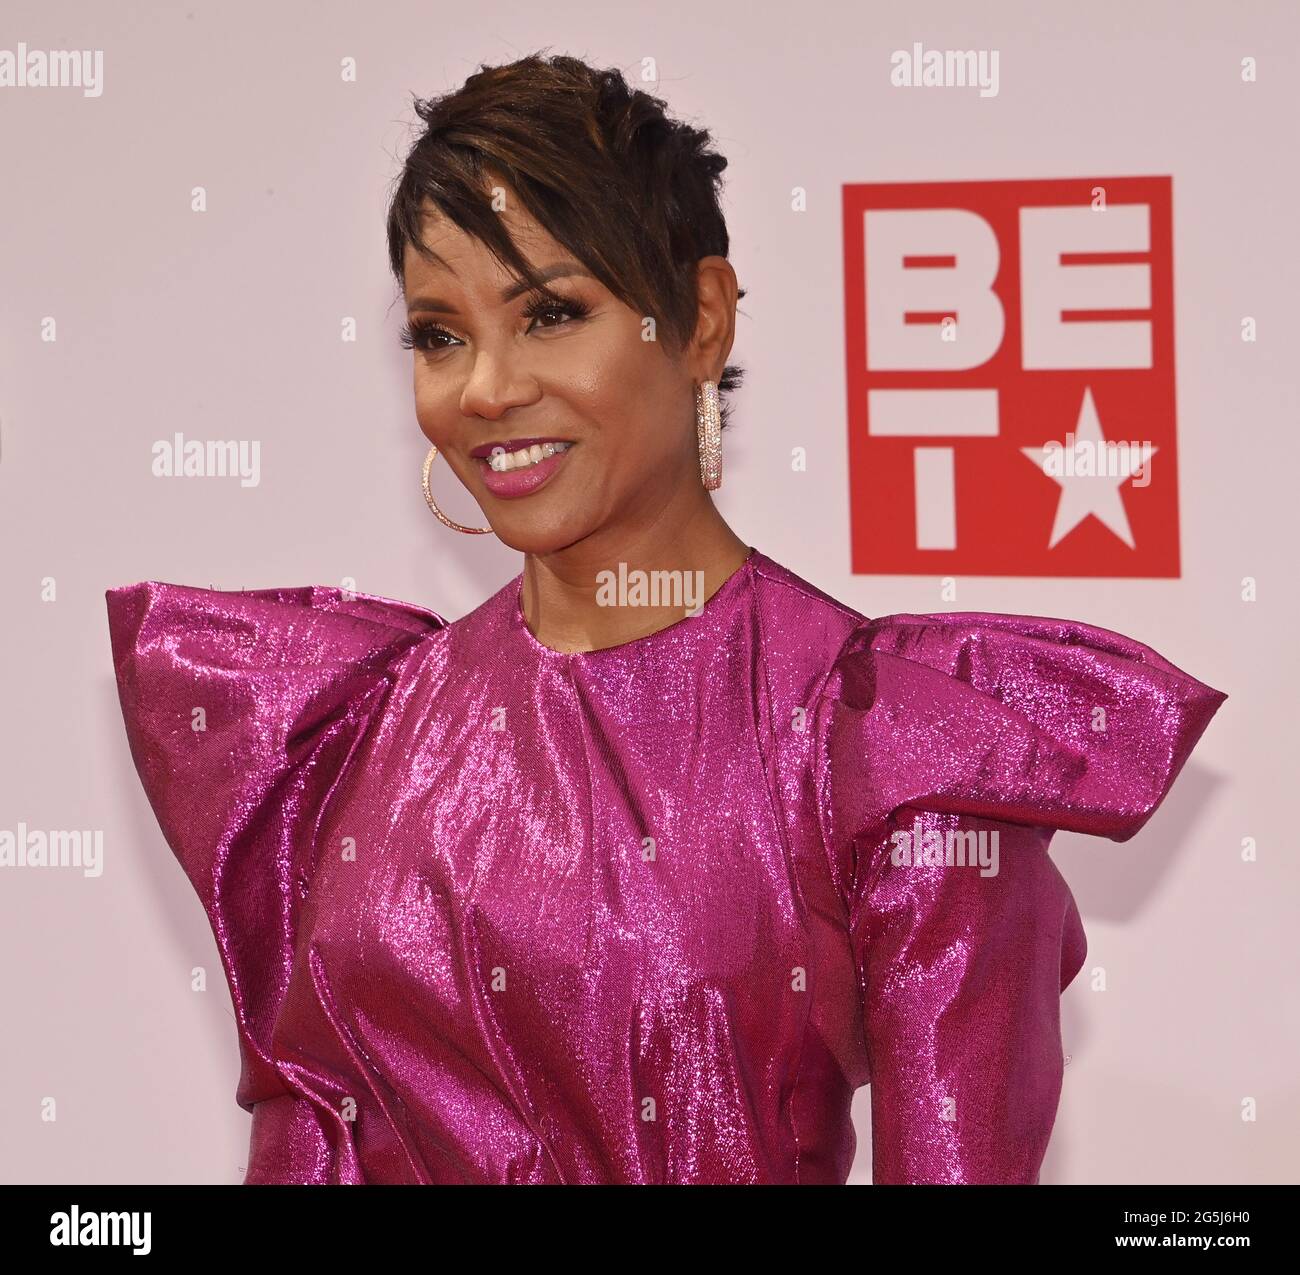 Los Angeles, United States. 28th June, 2021. MC Lyte arrives for the BET Awards at the Microsoft Theater in Los Angeles on Sunday, June 27, 2021. After a socially distanced ceremony in 2020 due to the coronavirus pandemic, the BET Awards returned to a live ceremony. Photo by Jim Ruymen/UPI Credit: UPI/Alamy Live News Stock Photo